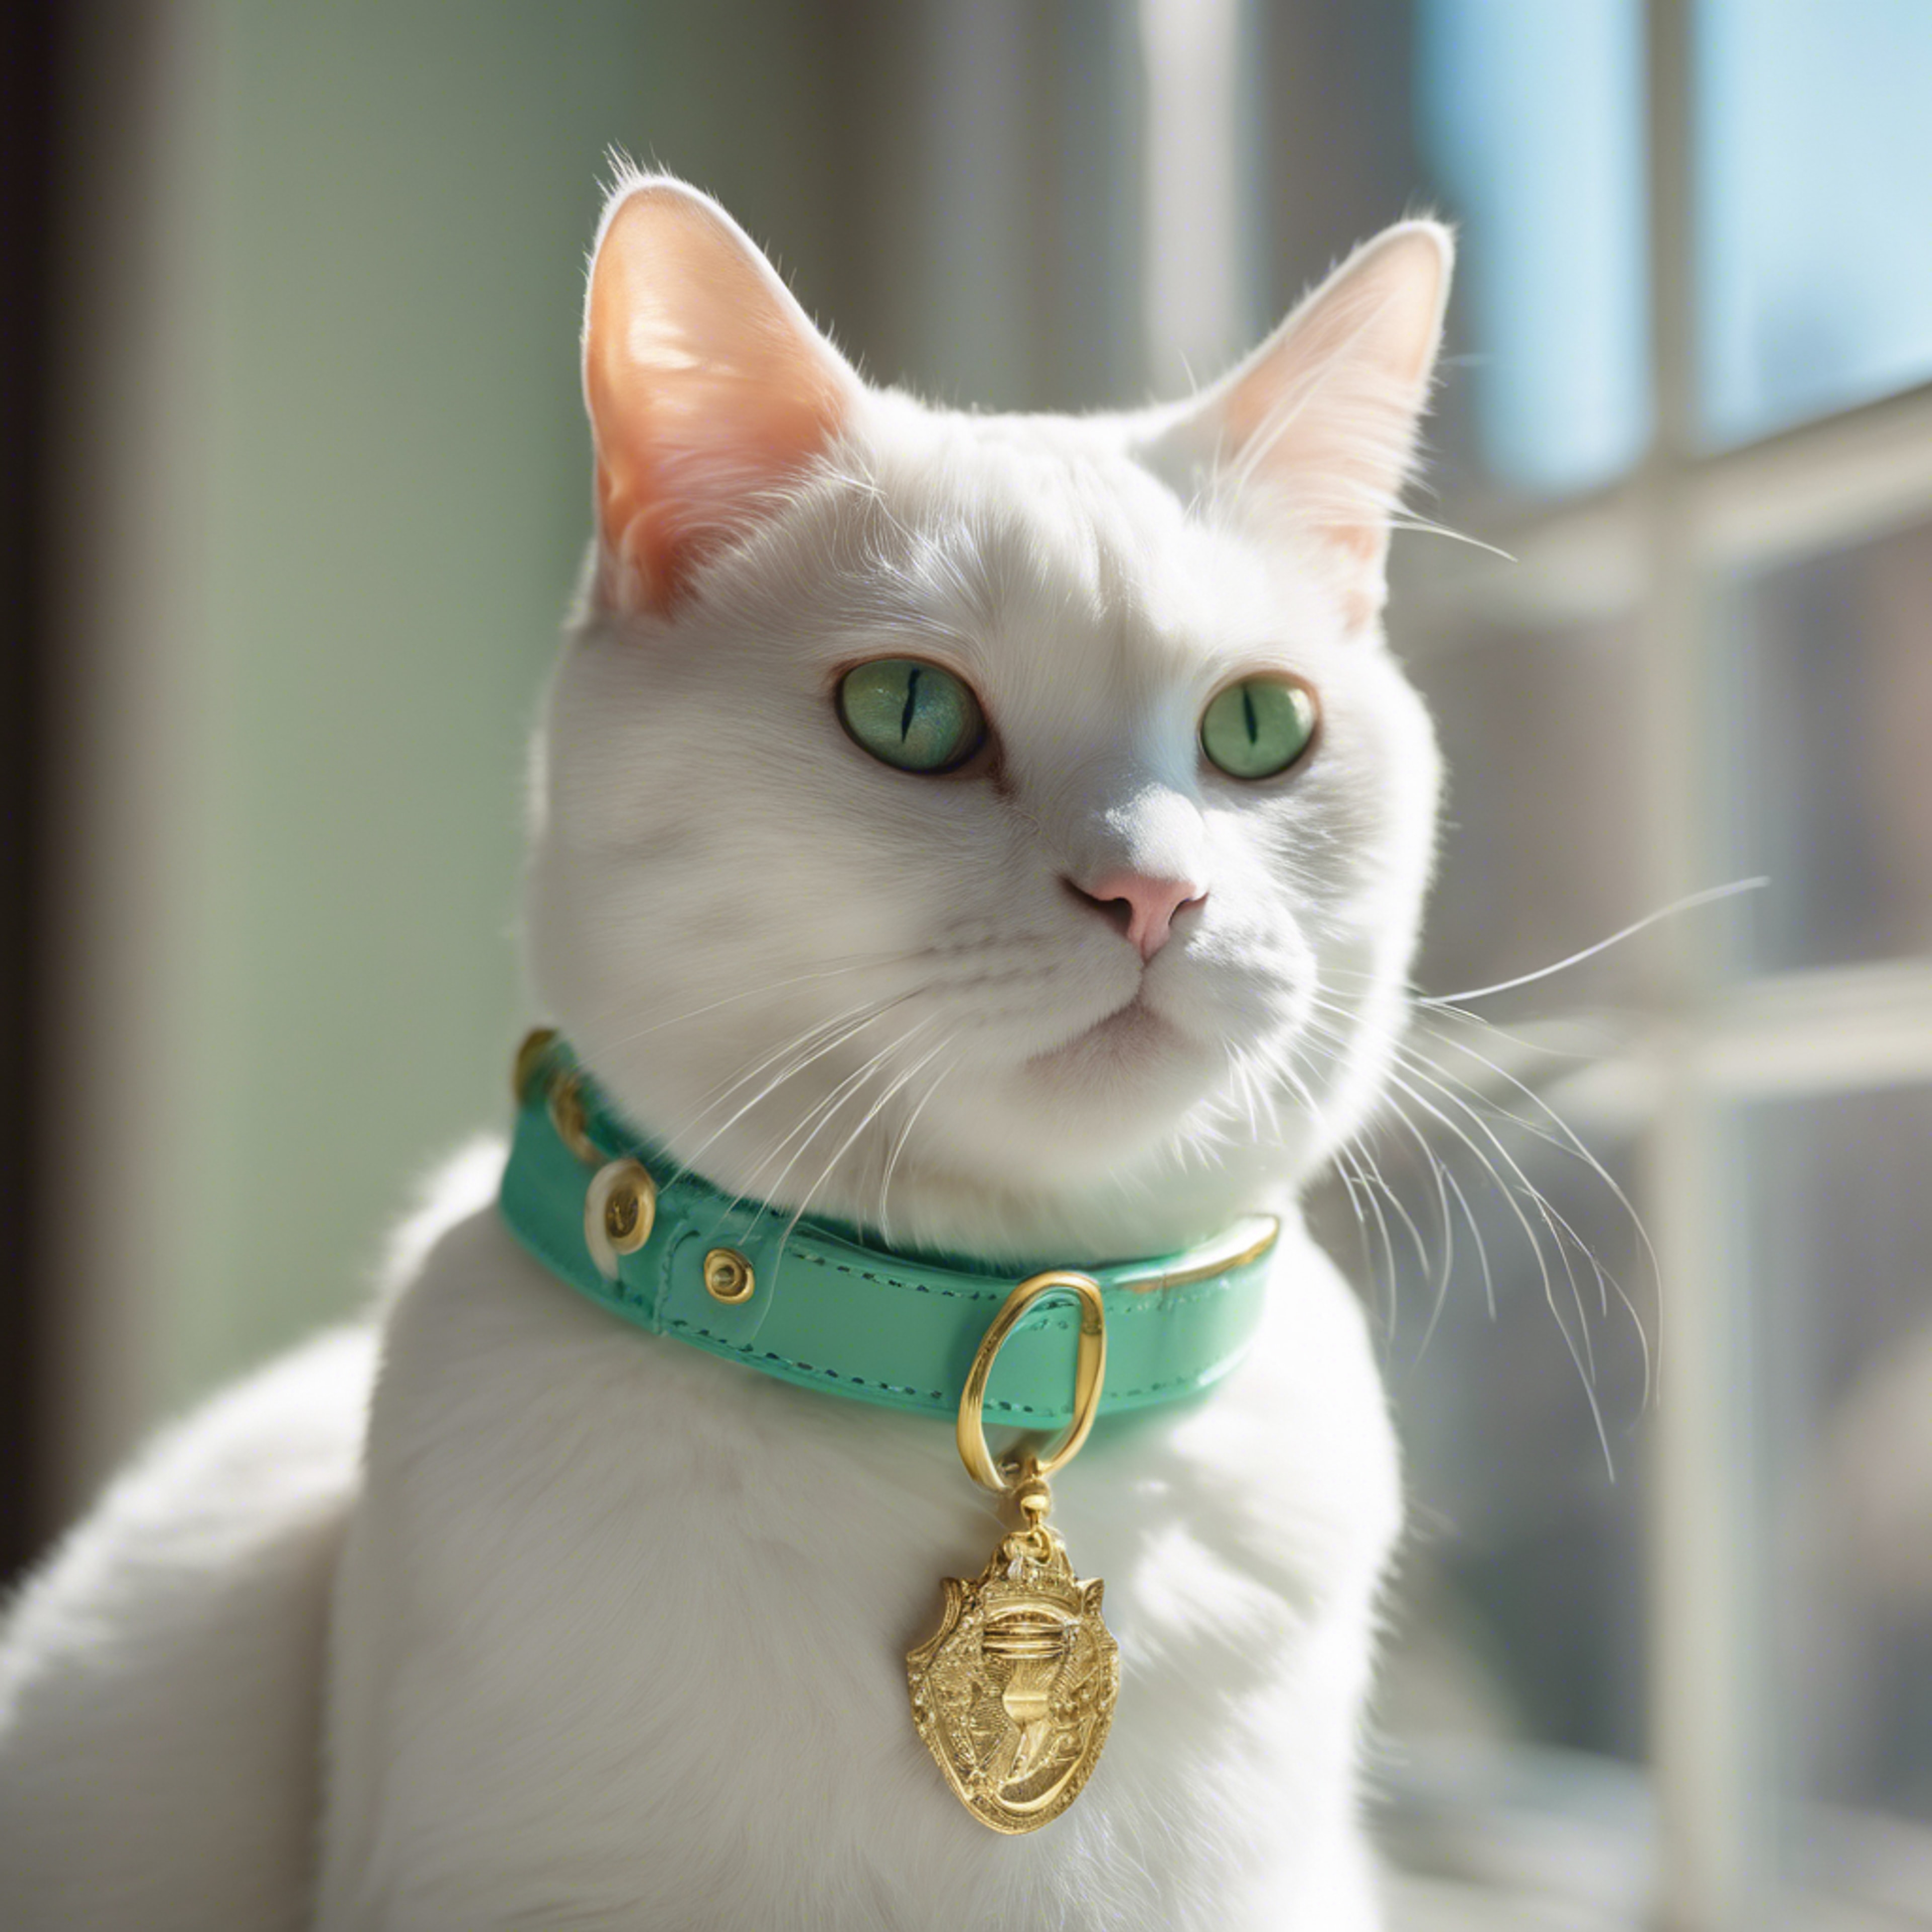 An adorable white cat wearing a preppy mint green collar with a gold buckle sitting in a sunny window. Tapéta[8de0351476e04873aa5e]